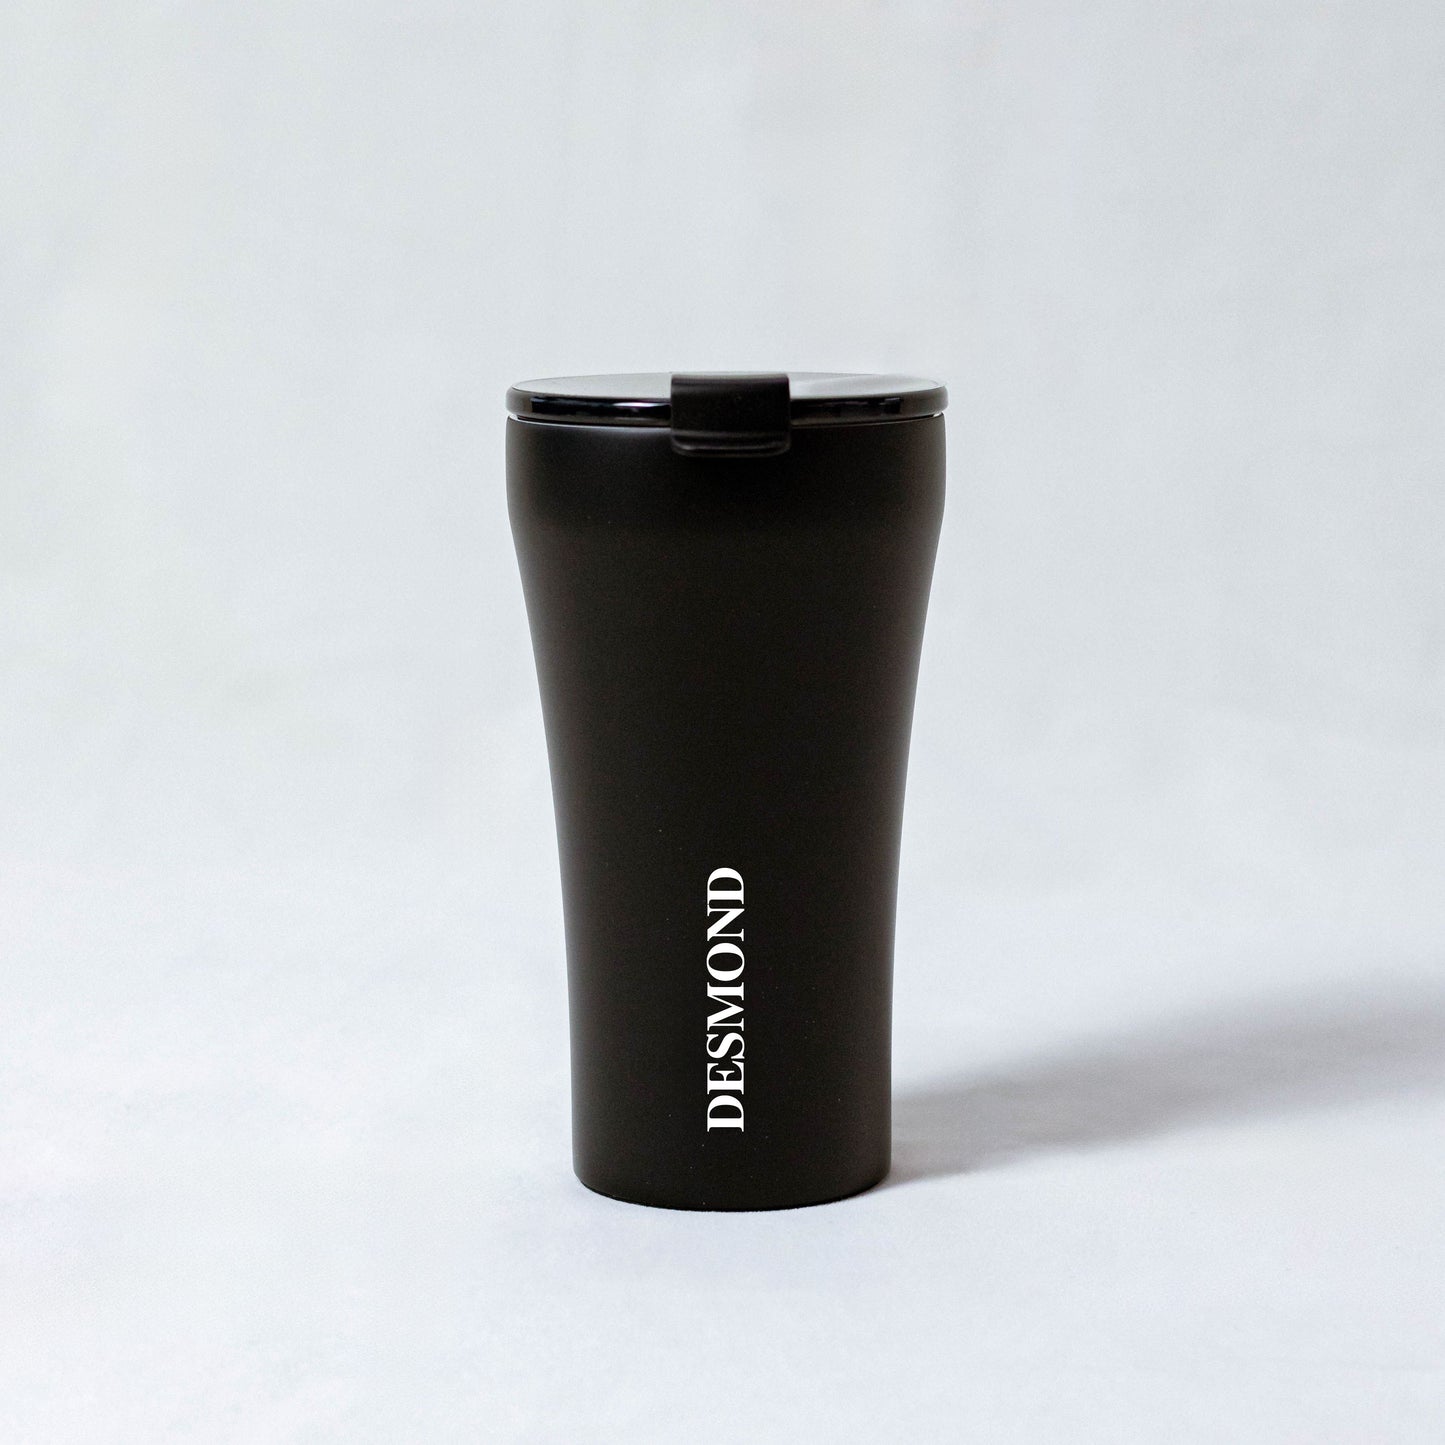 NEW! Customised Sttoke Insulated Ceramic Cup (Shatterproof) - Luxe Black (12 oz) (Out of stock)